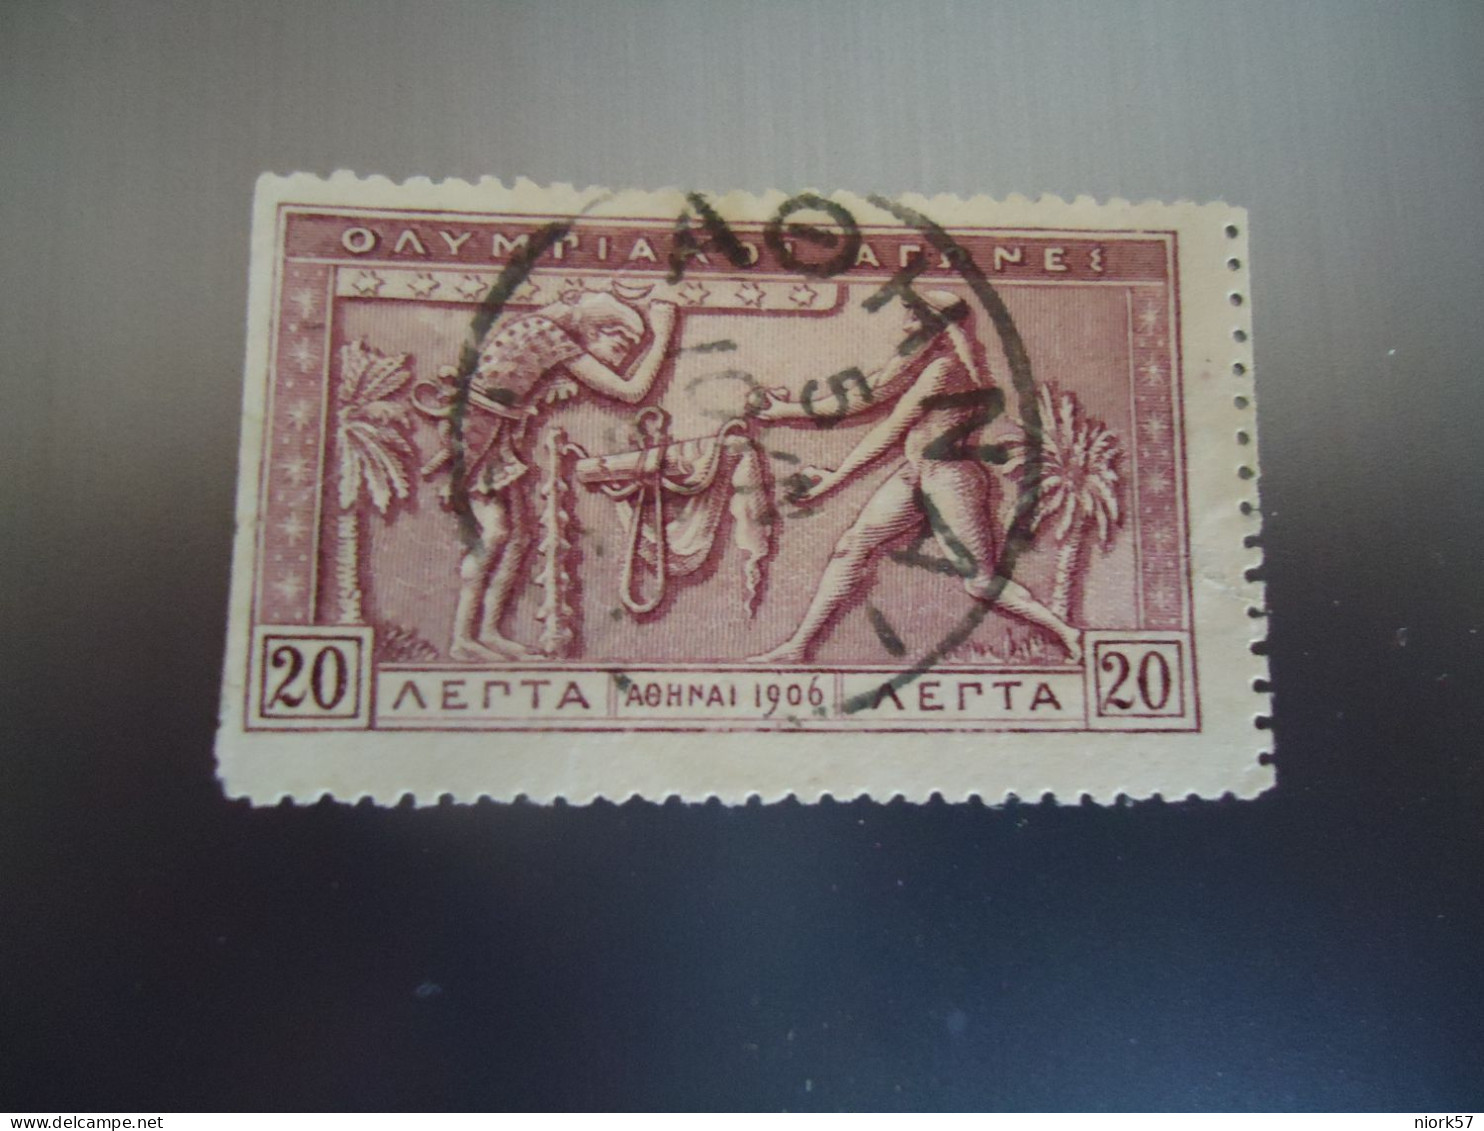 GREECE USED STAMPS OLYMPIC GAMES 1906   POSΤMARK  ΑΘΗΝΑ - Marcophilie - EMA (Empreintes Machines)